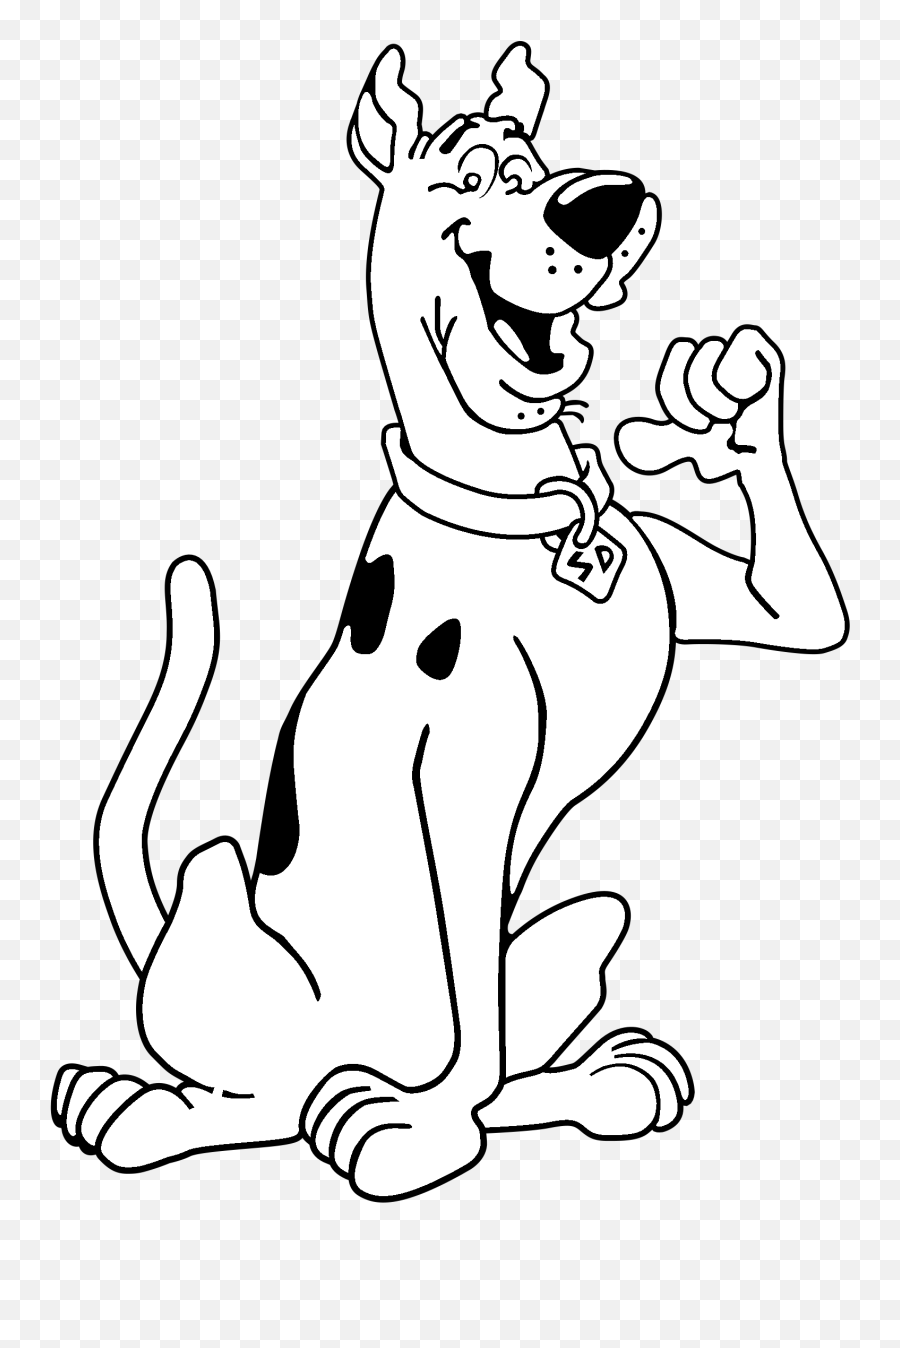 Scooby Doo Clipart Black And White - Black And White Scooby Doo Clip Art Png,Scooby Doo Transparent